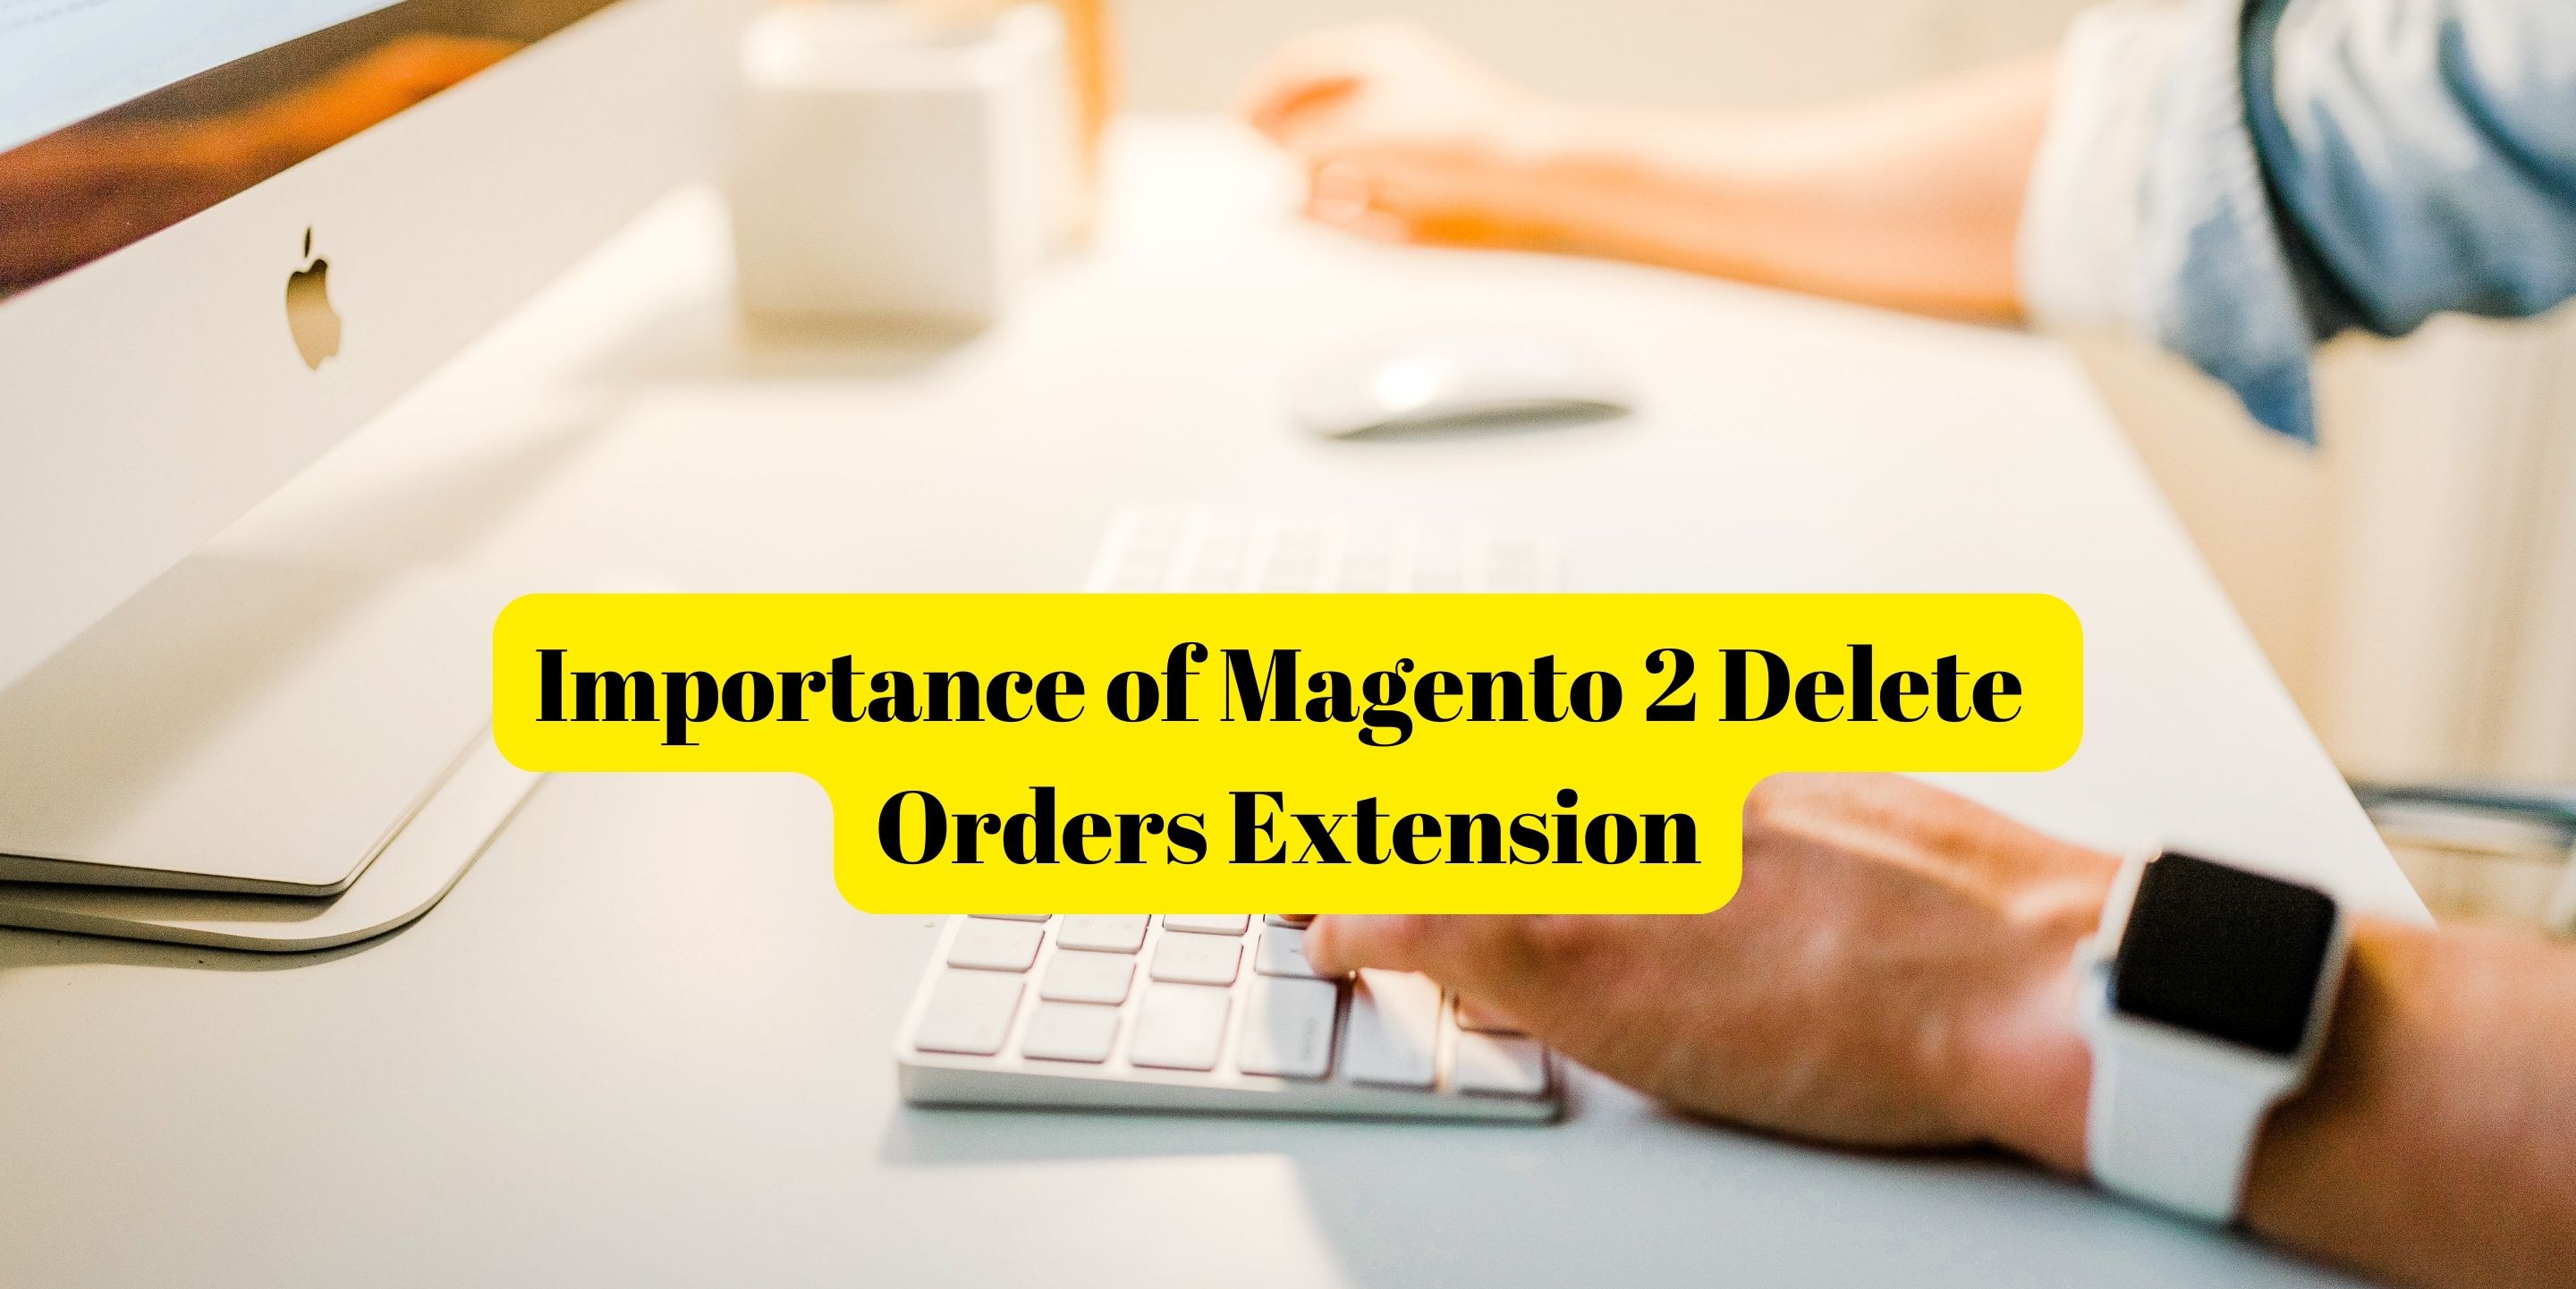 importance of Magento 2 Delete Orders Extension